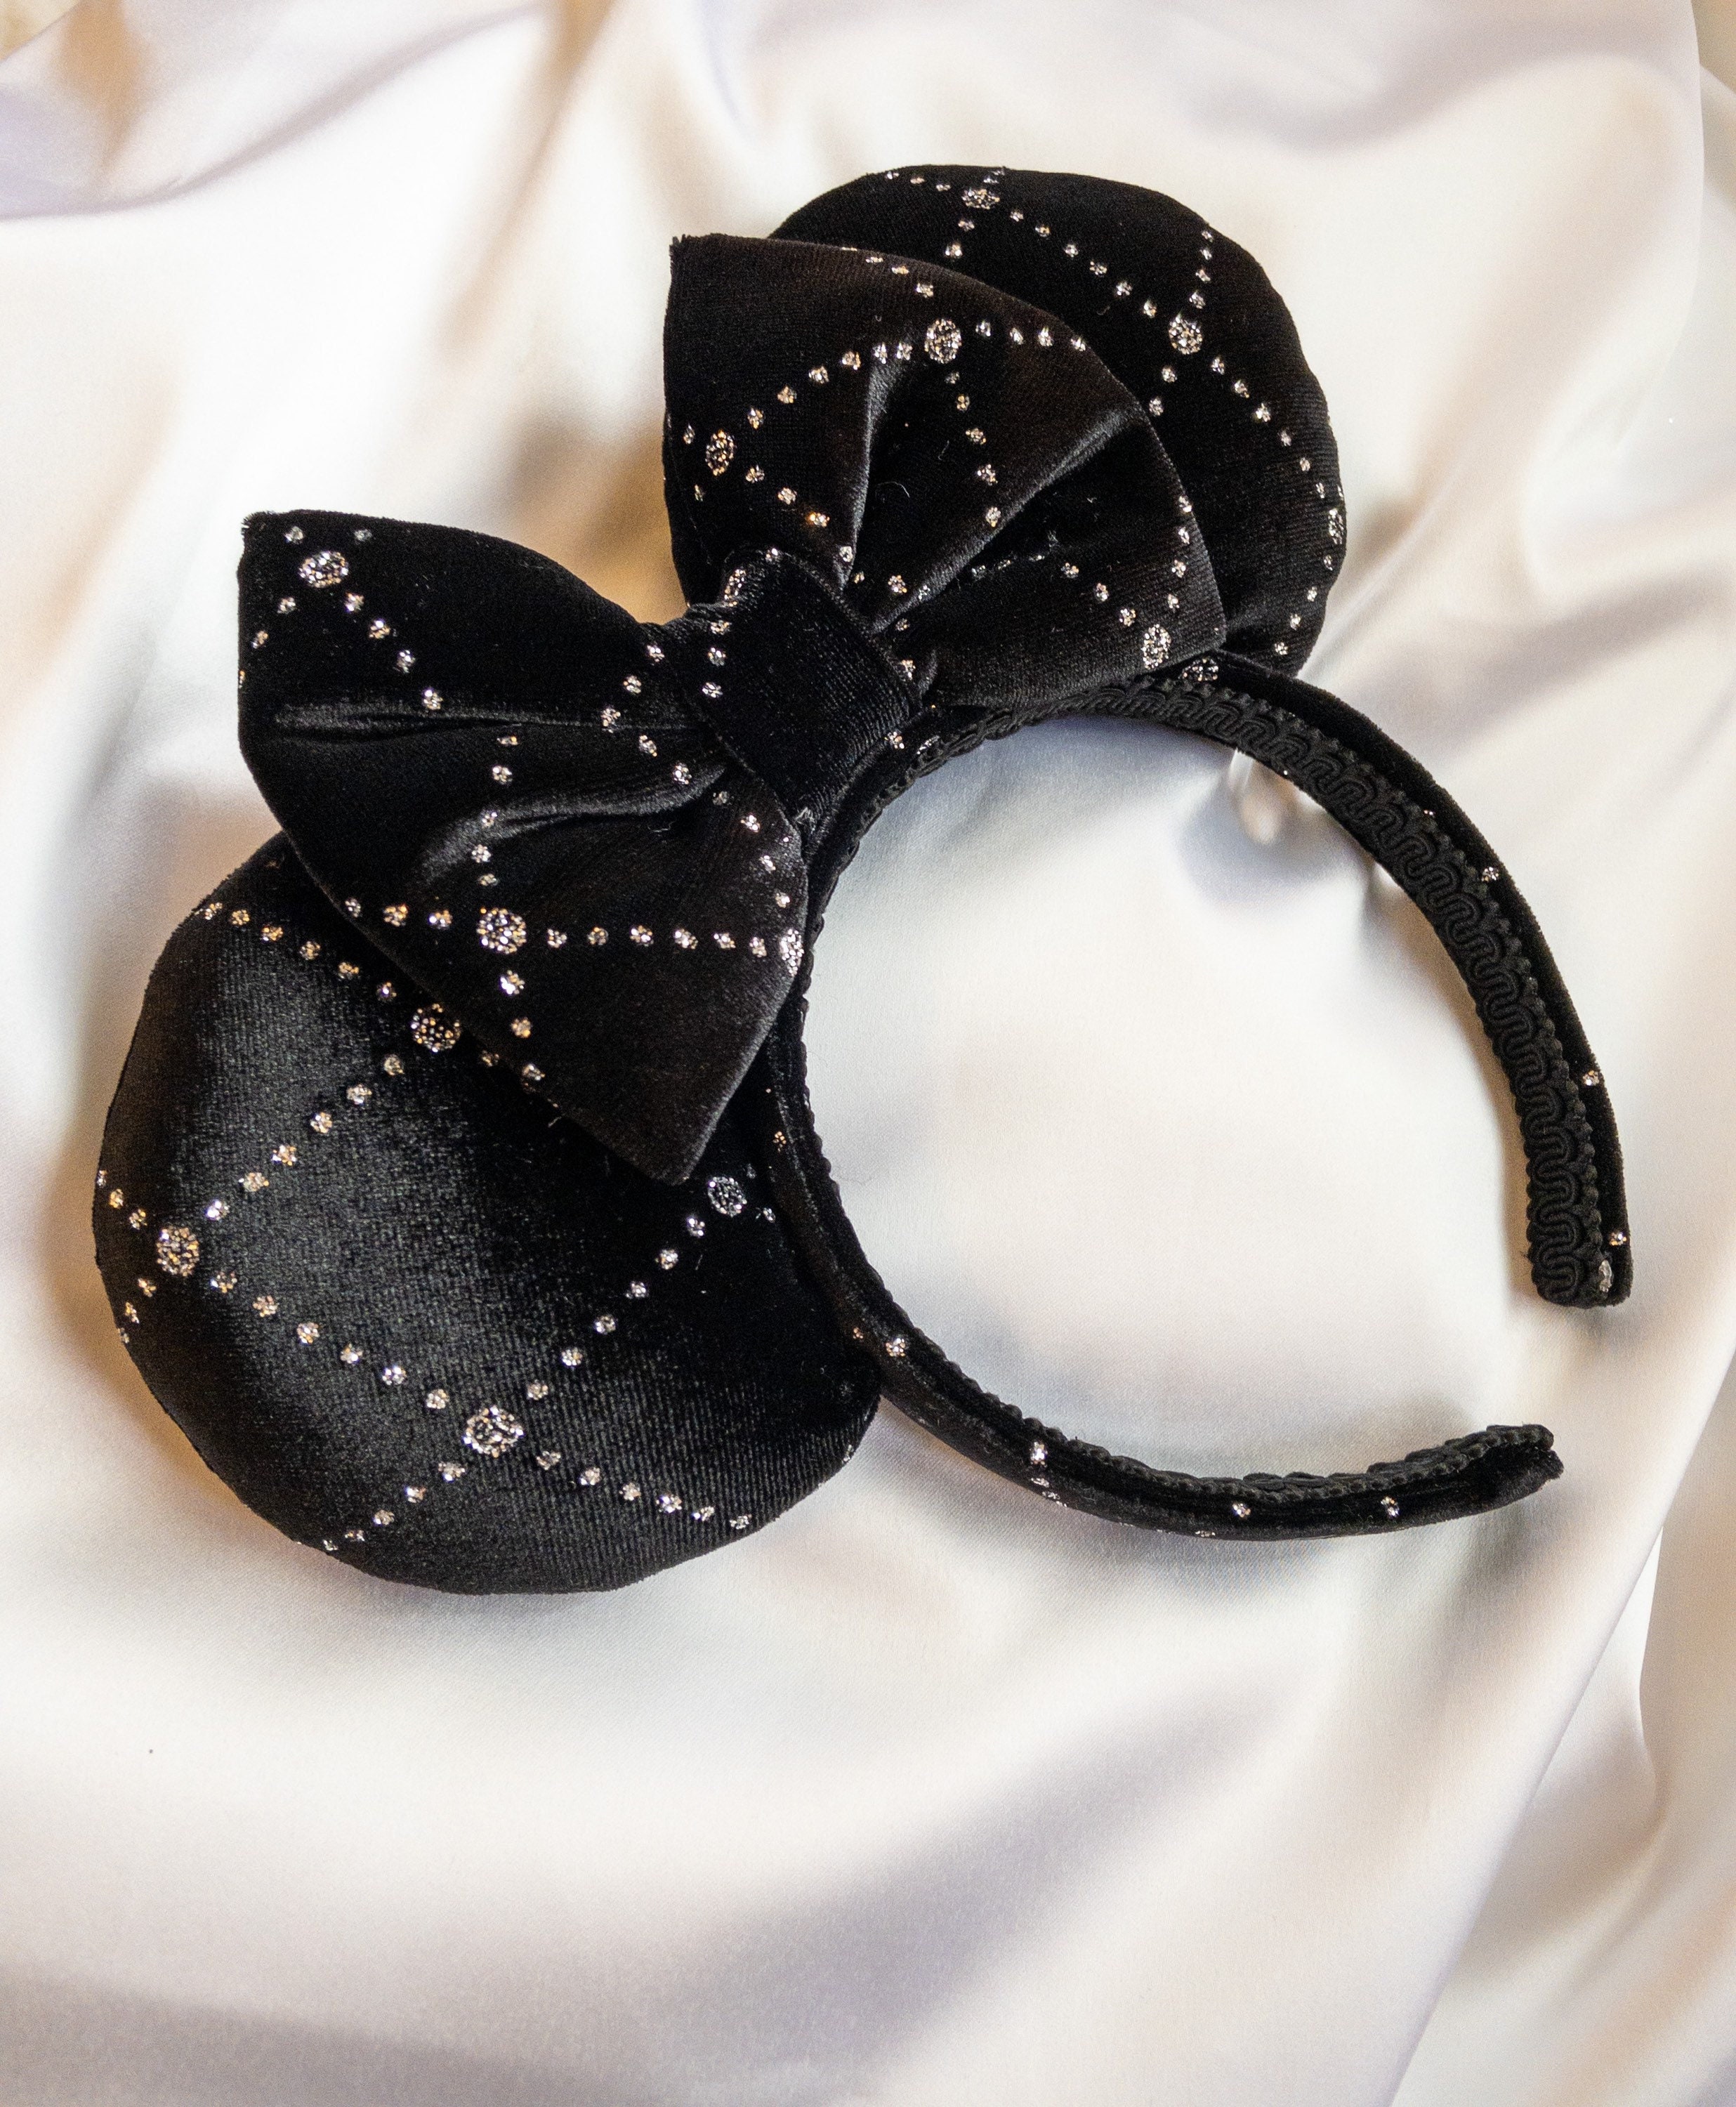 Bespoke Minnie Mouse ears created by Gucci, Louis Vuitton, Prada and others  - Luxurylaunches